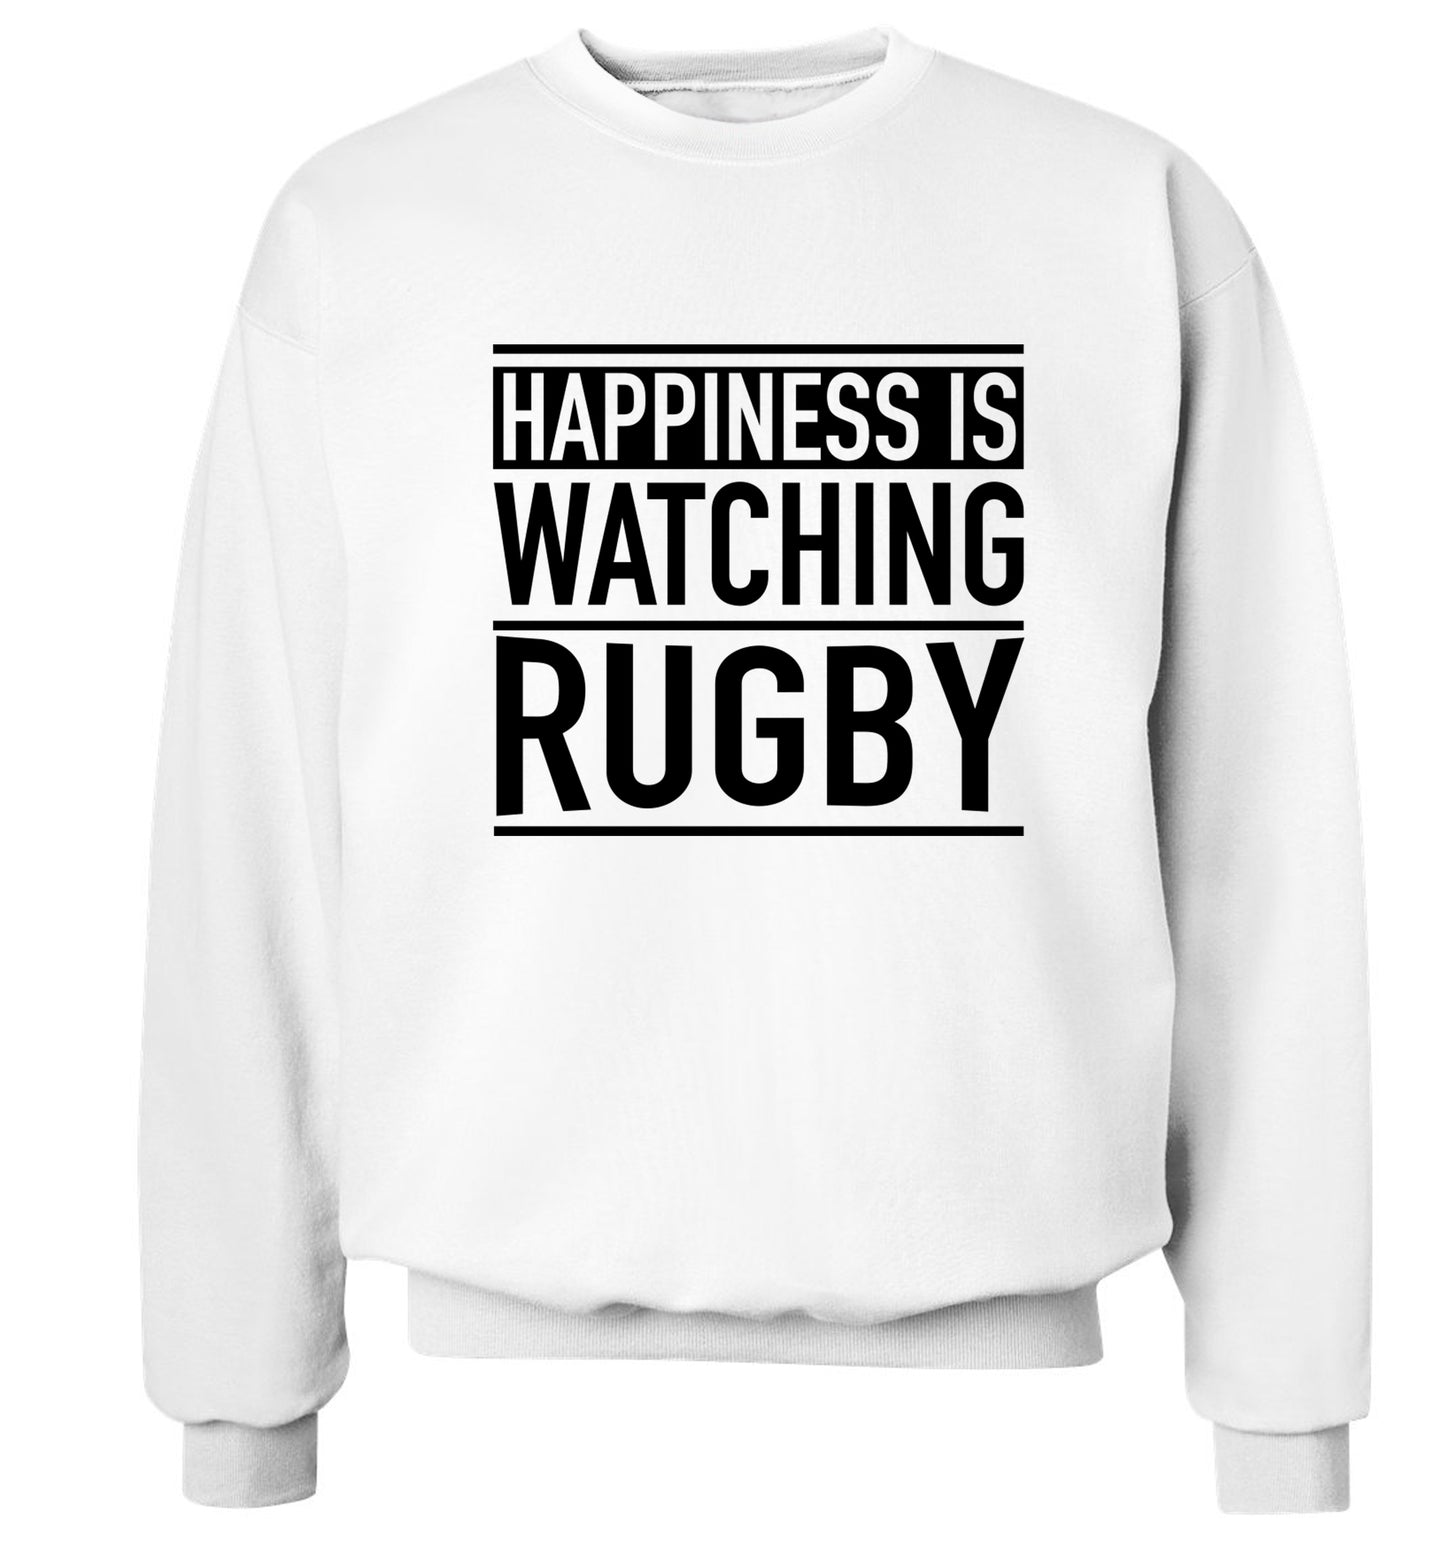 Happiness is watching rugby Adult's unisex white Sweater 2XL